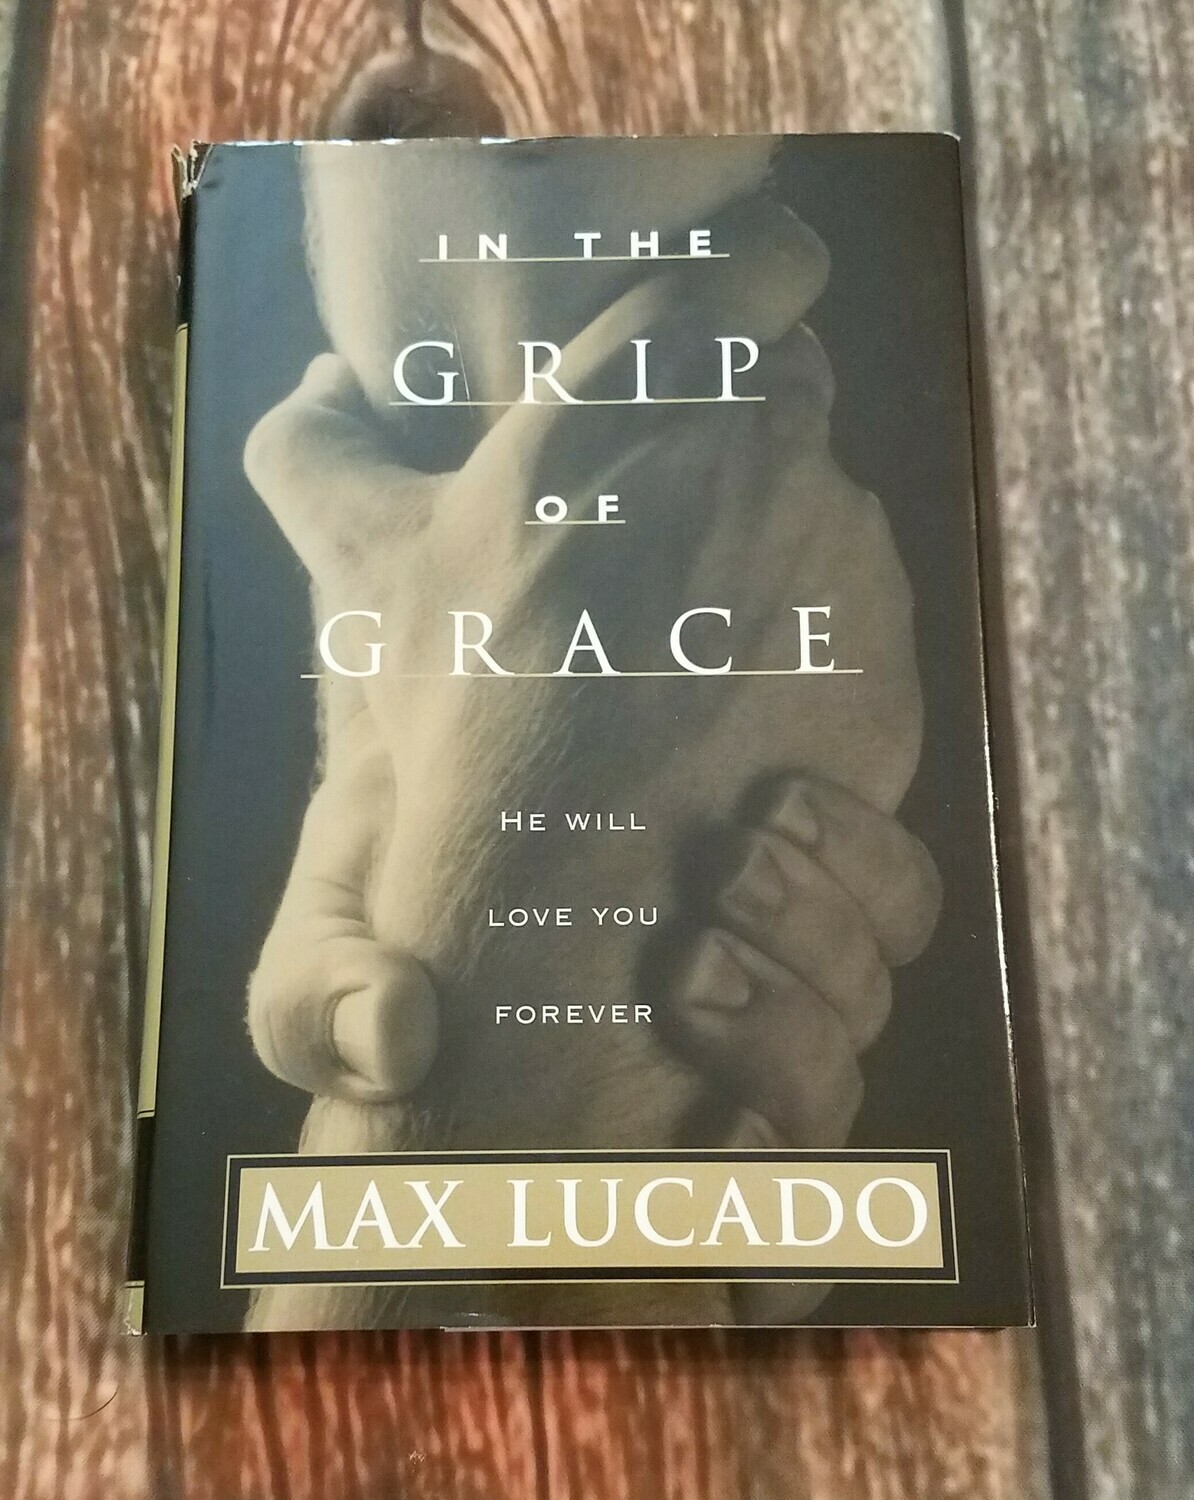 In the Grip of Grace by Max Lucado